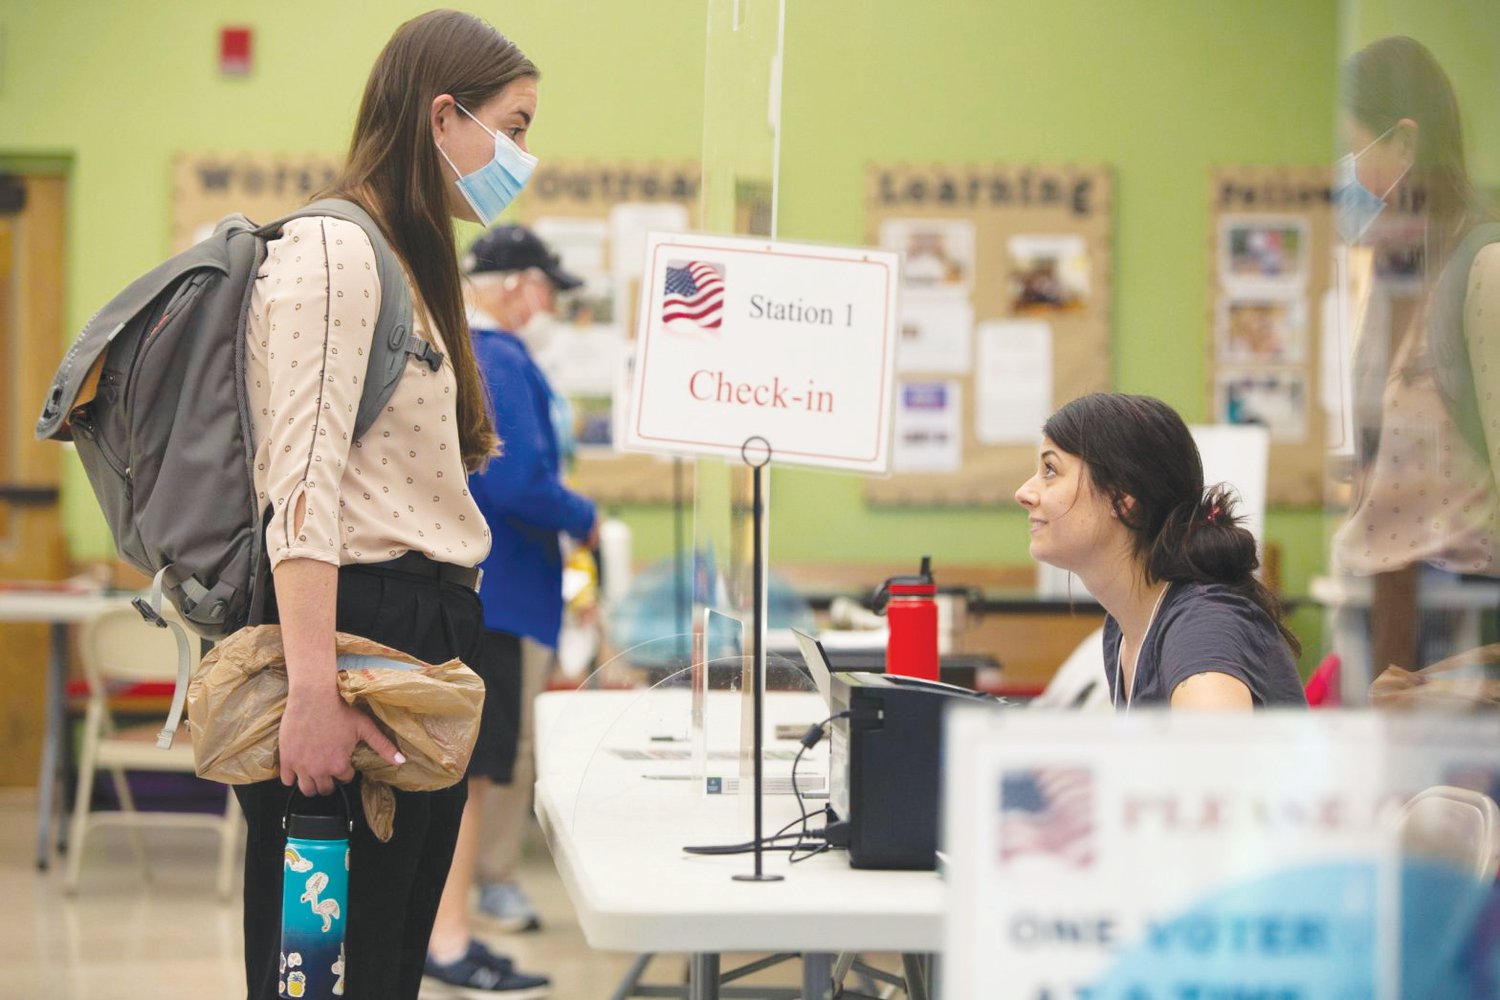 Buncombe County poll worker Rachel Naso checks in Catherine Perez for primary voting on May 17 at the St. Mark’s Lutheran Church polling place in Asheville.